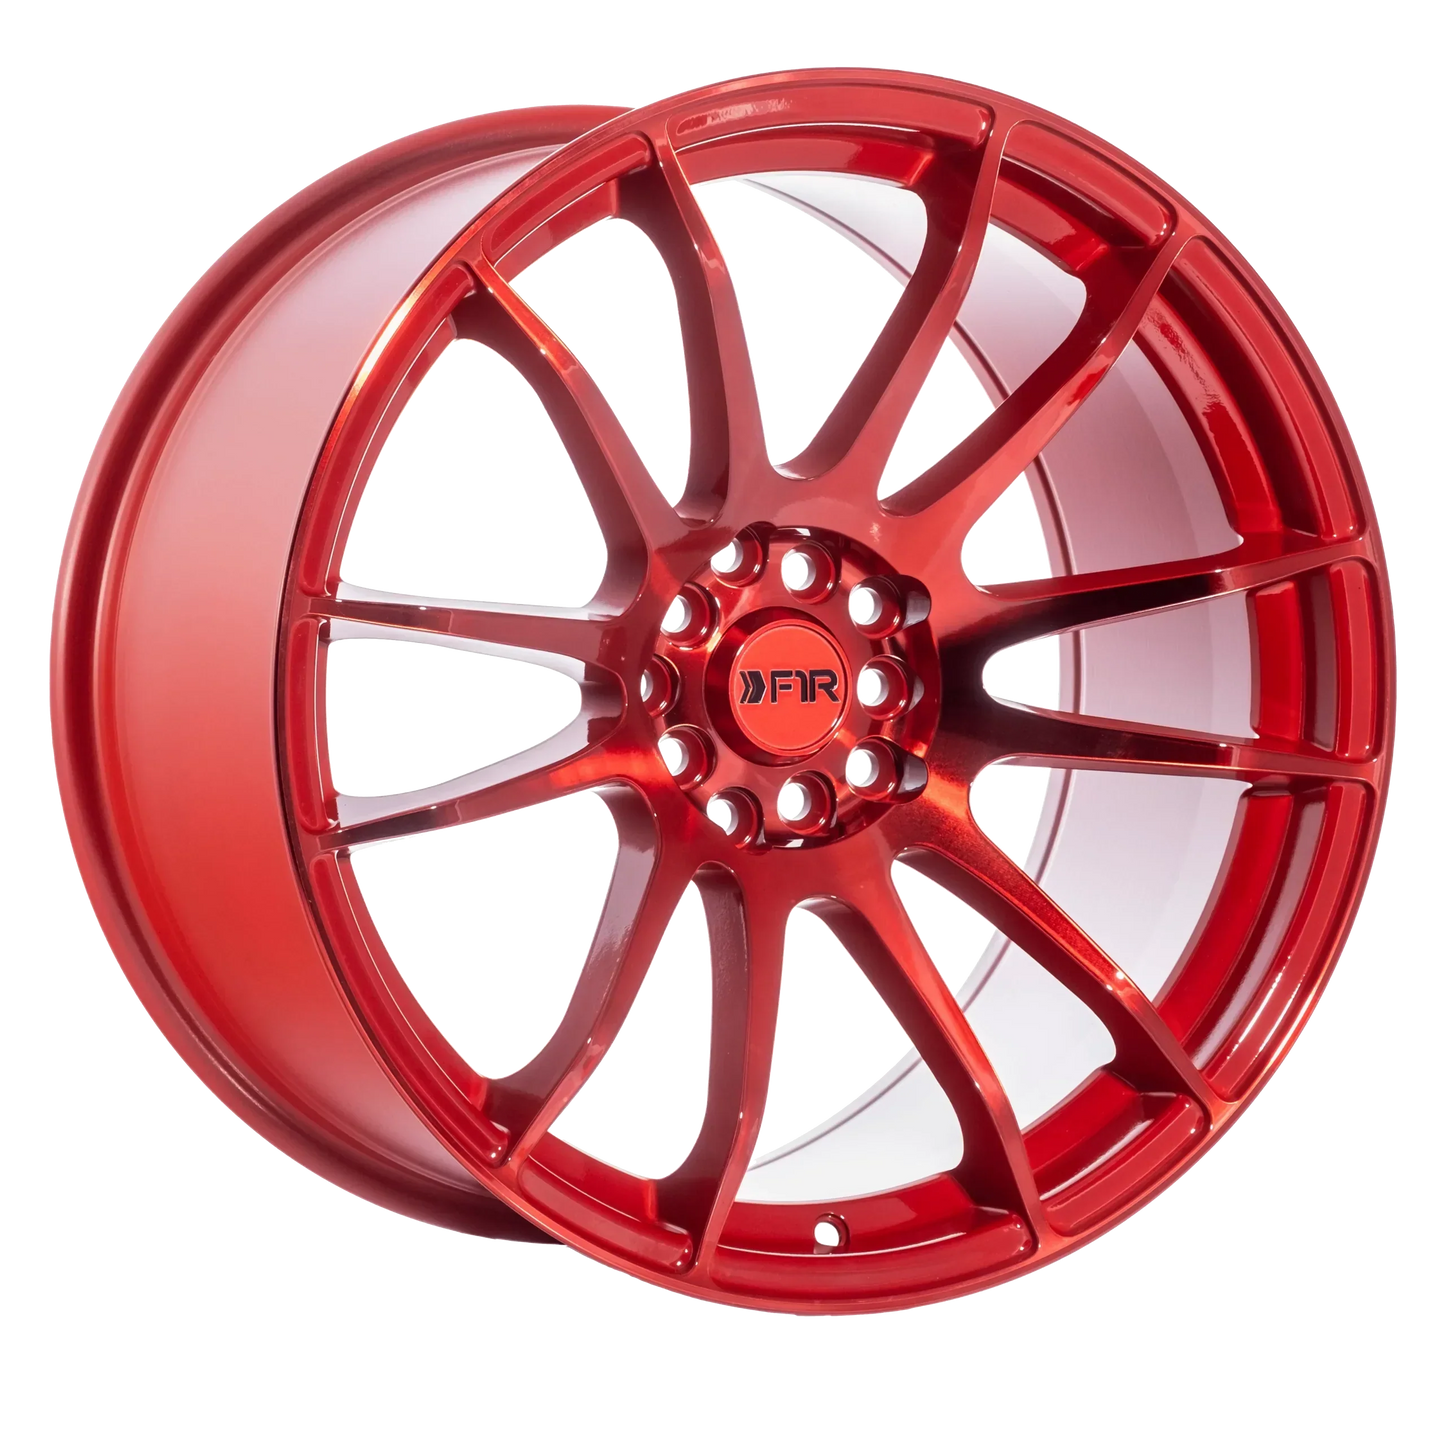 18" F1R F107 Candy Red 5x100 / 5x114.3 Dual Pattern ( Staggered Setup )